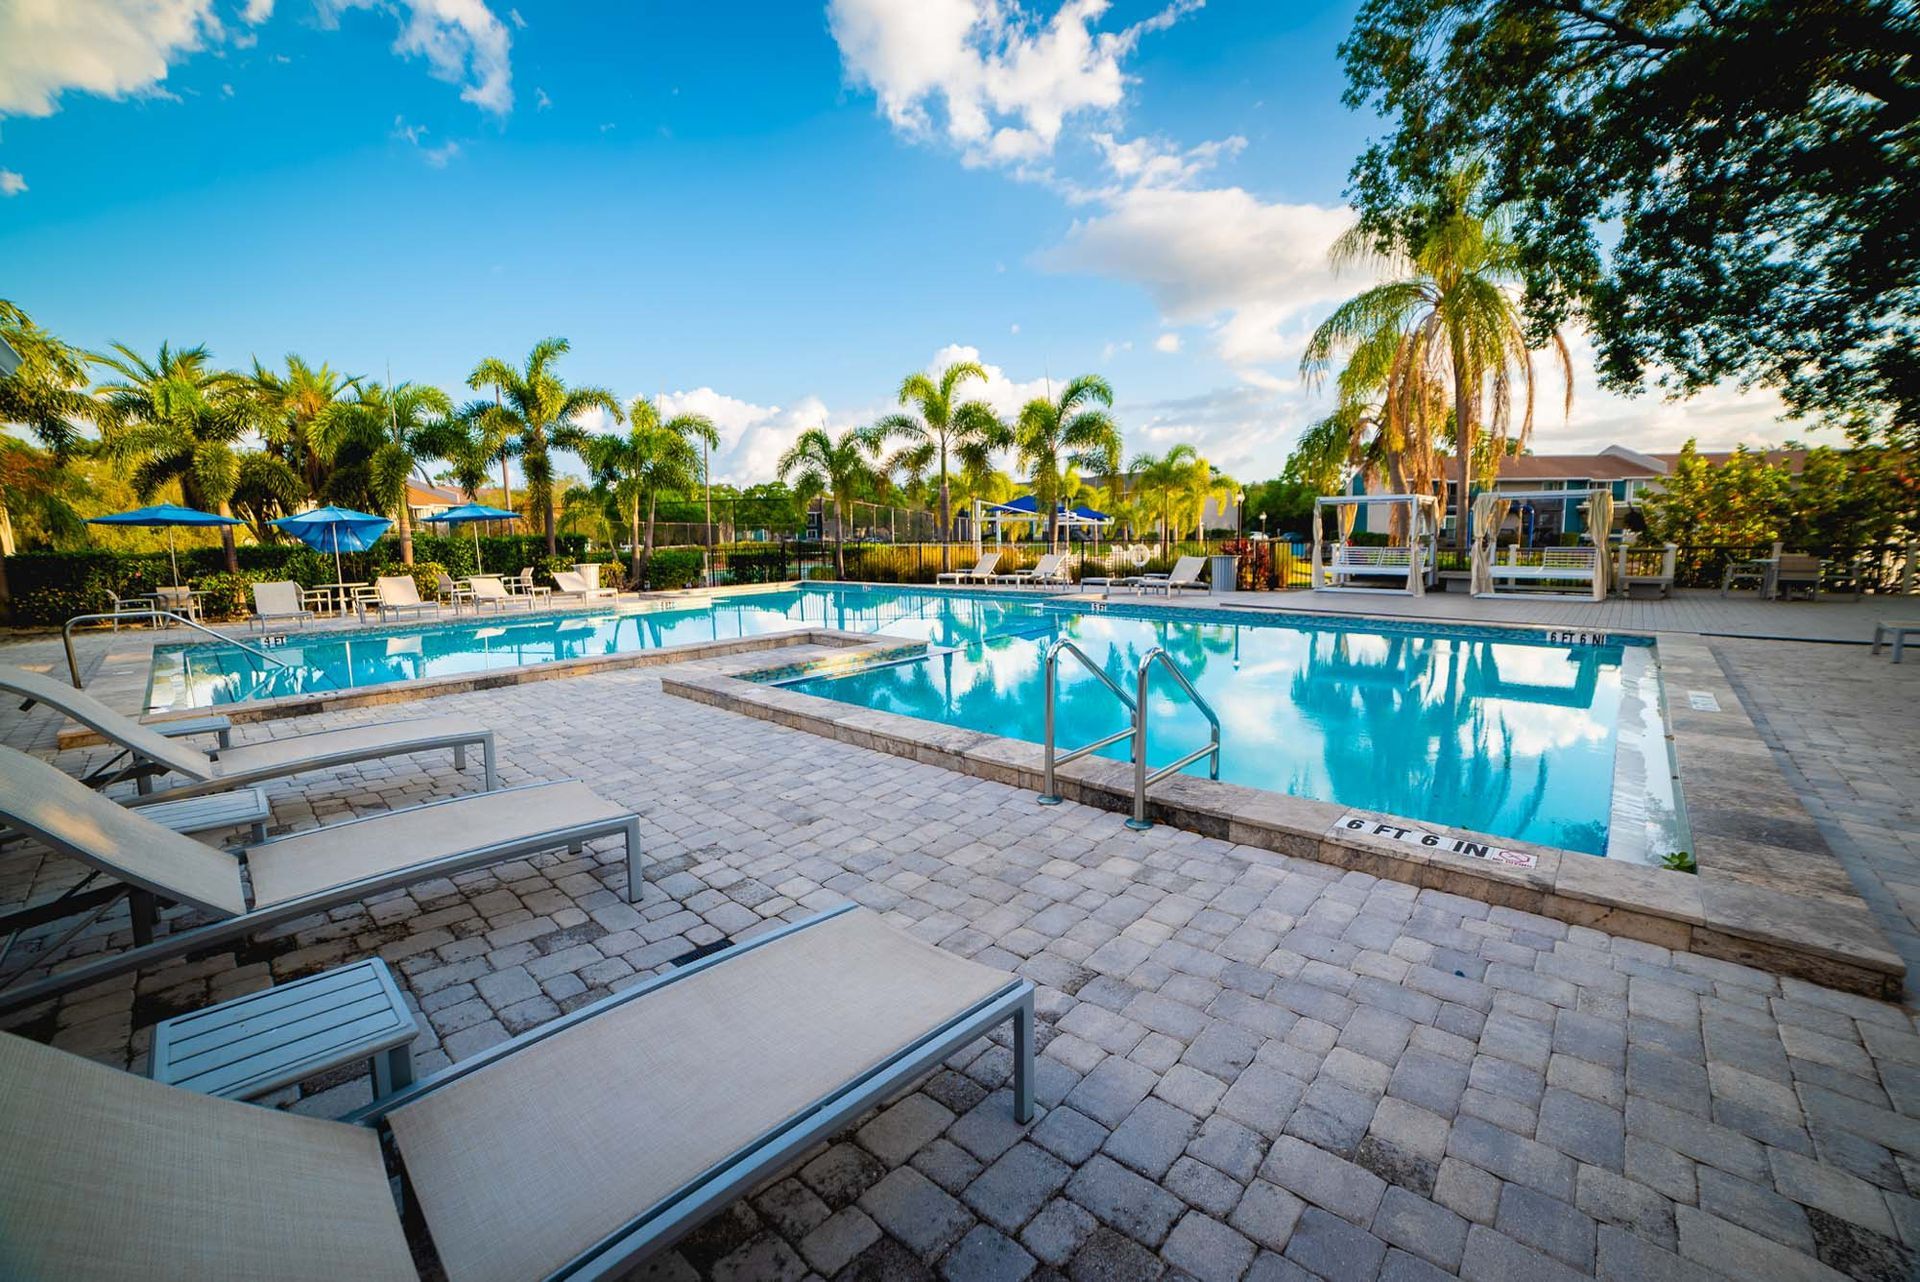 A large swimming pool surrounded by chairs and palm trees on a sunny day at Trellis at The Lakes.